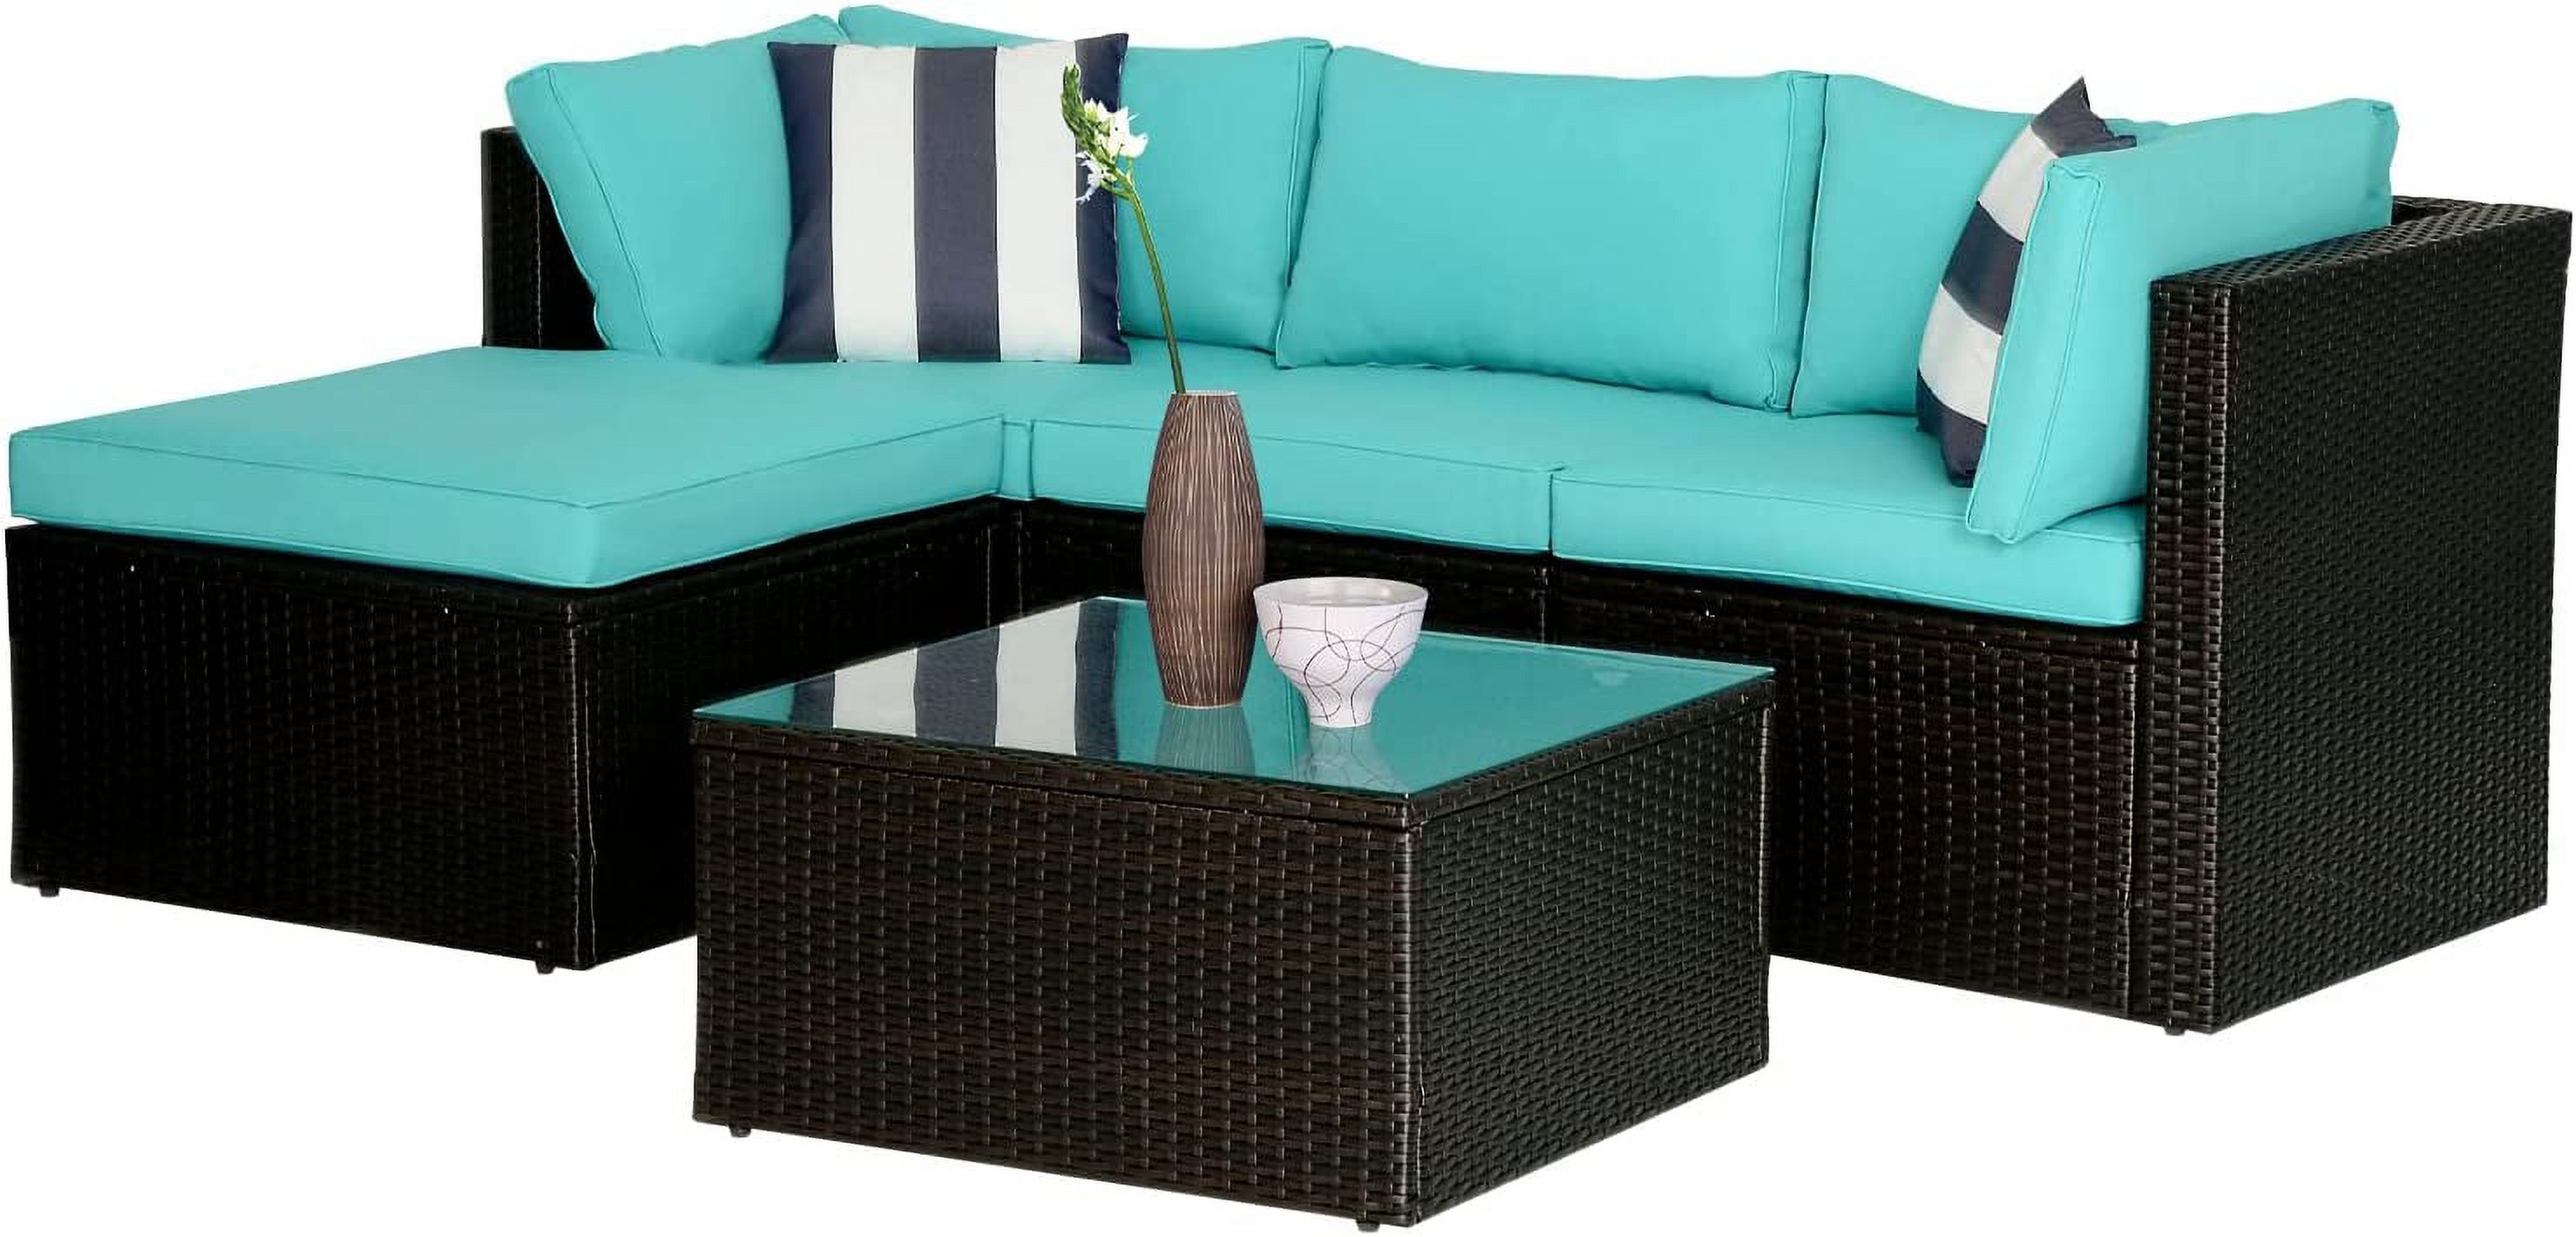 5 Pieces Rattan Patio Furniture Sets Modular Outdoor Conversation Sofa Set All Weather Wicker Sectional Sofa with 2 Corner Chair Armless Chair Ottoman Chair Glass Table 2 Pillow,Blue Cushion - image 1 of 1